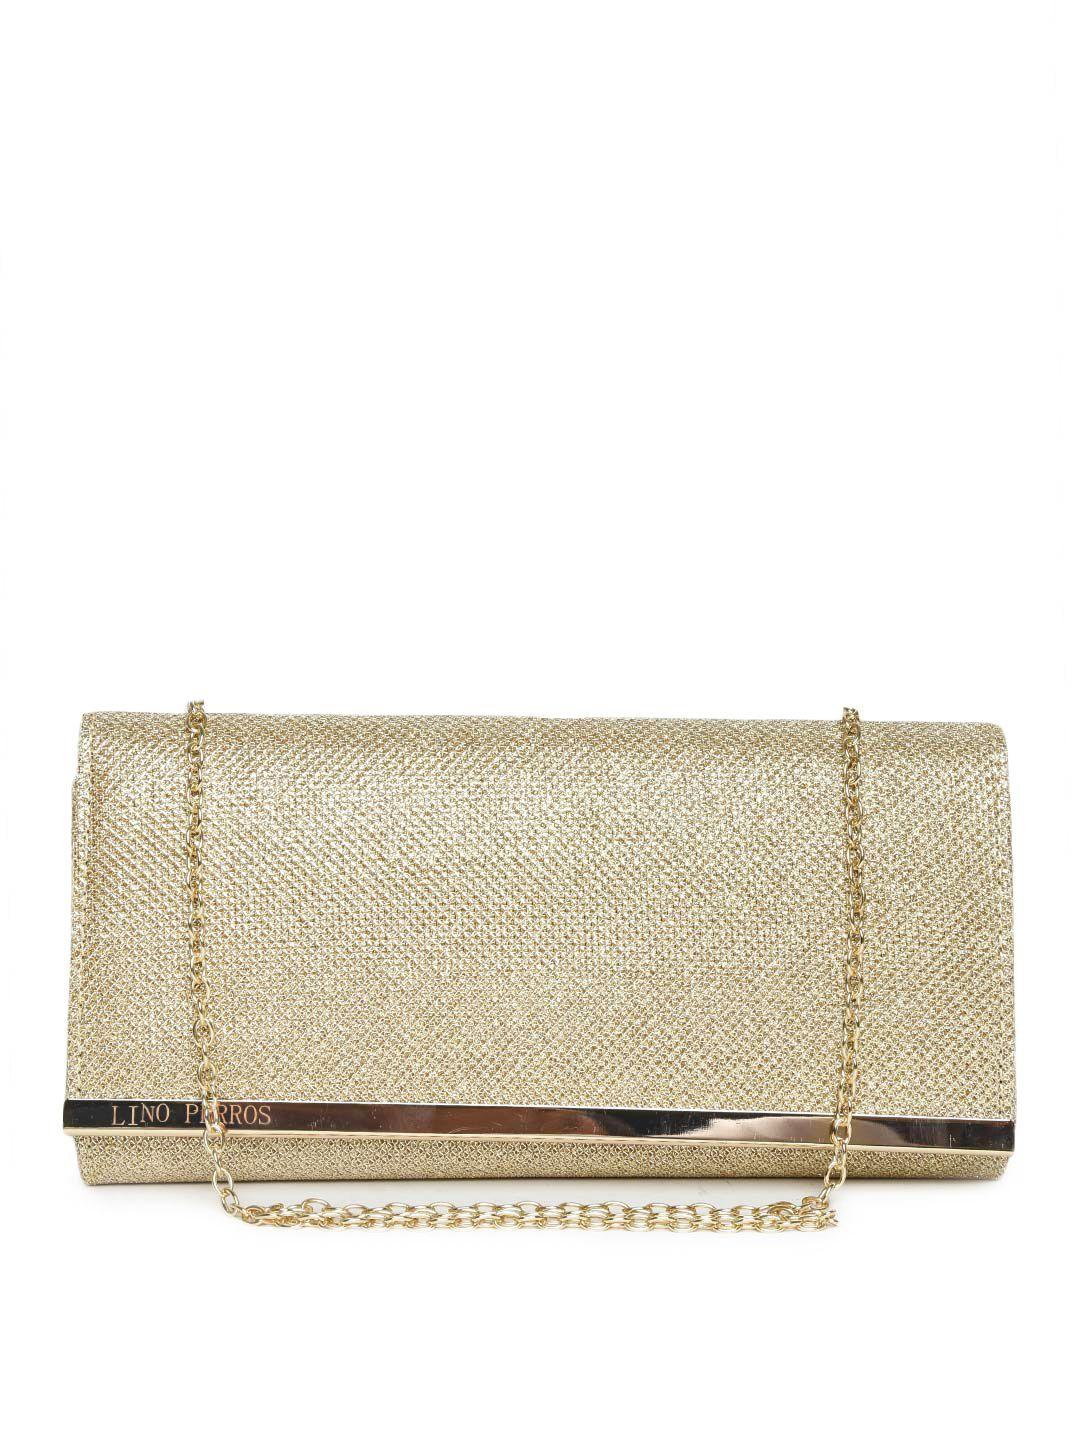 lino perros gold-toned textured shimmer clutch with chain strap